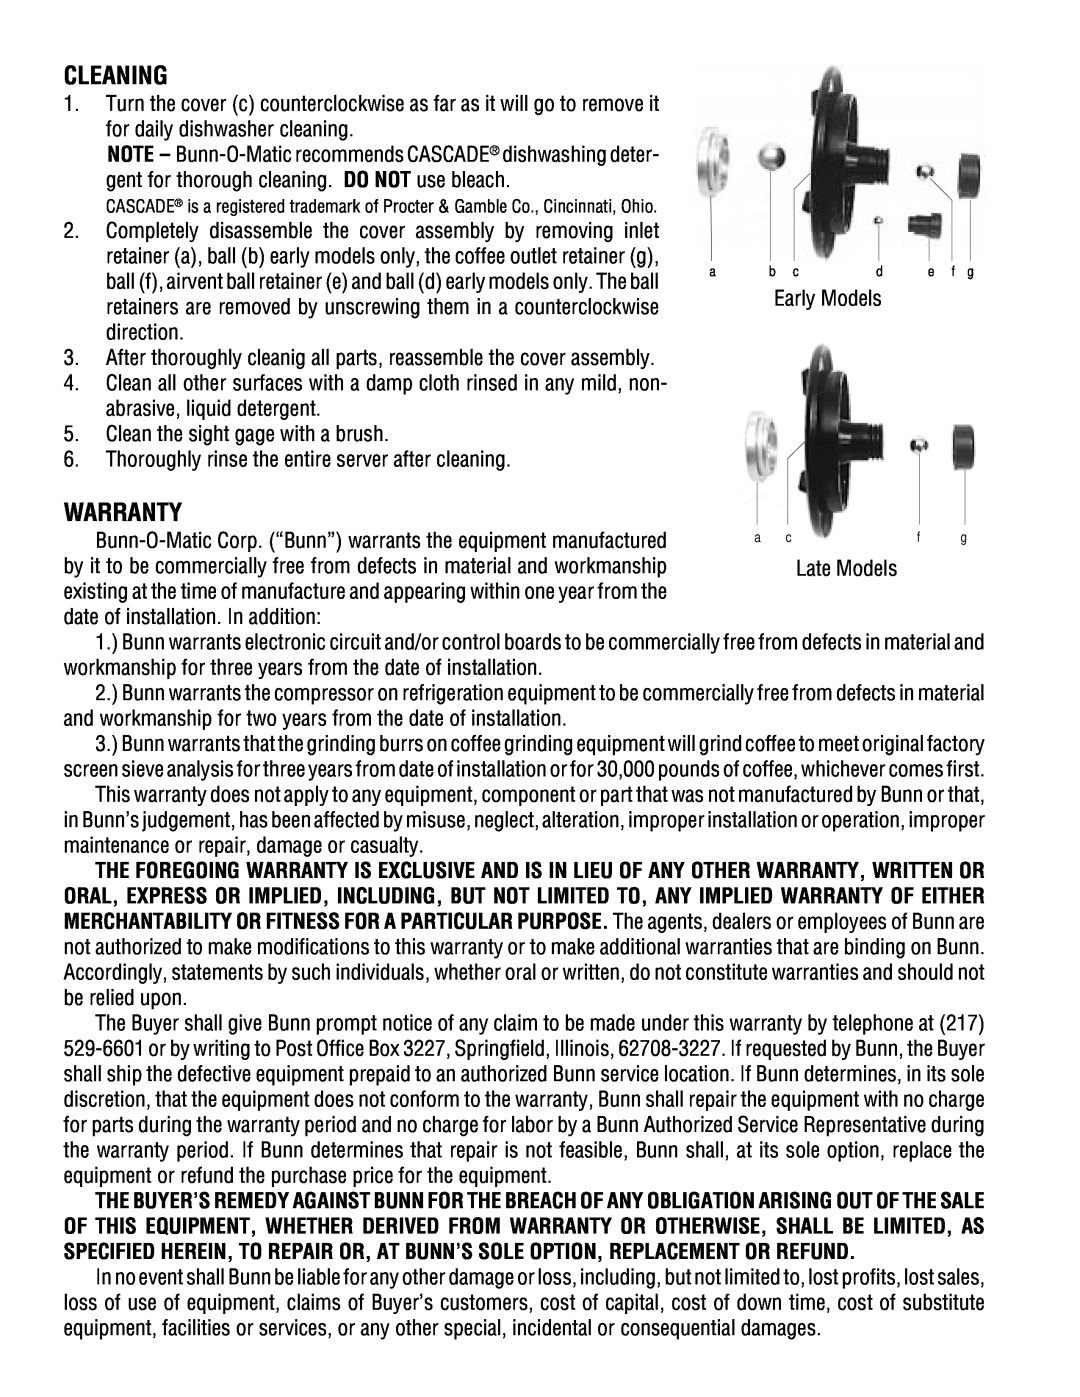 Bunn 1 GPR operating instructions Cleaning, Warranty 